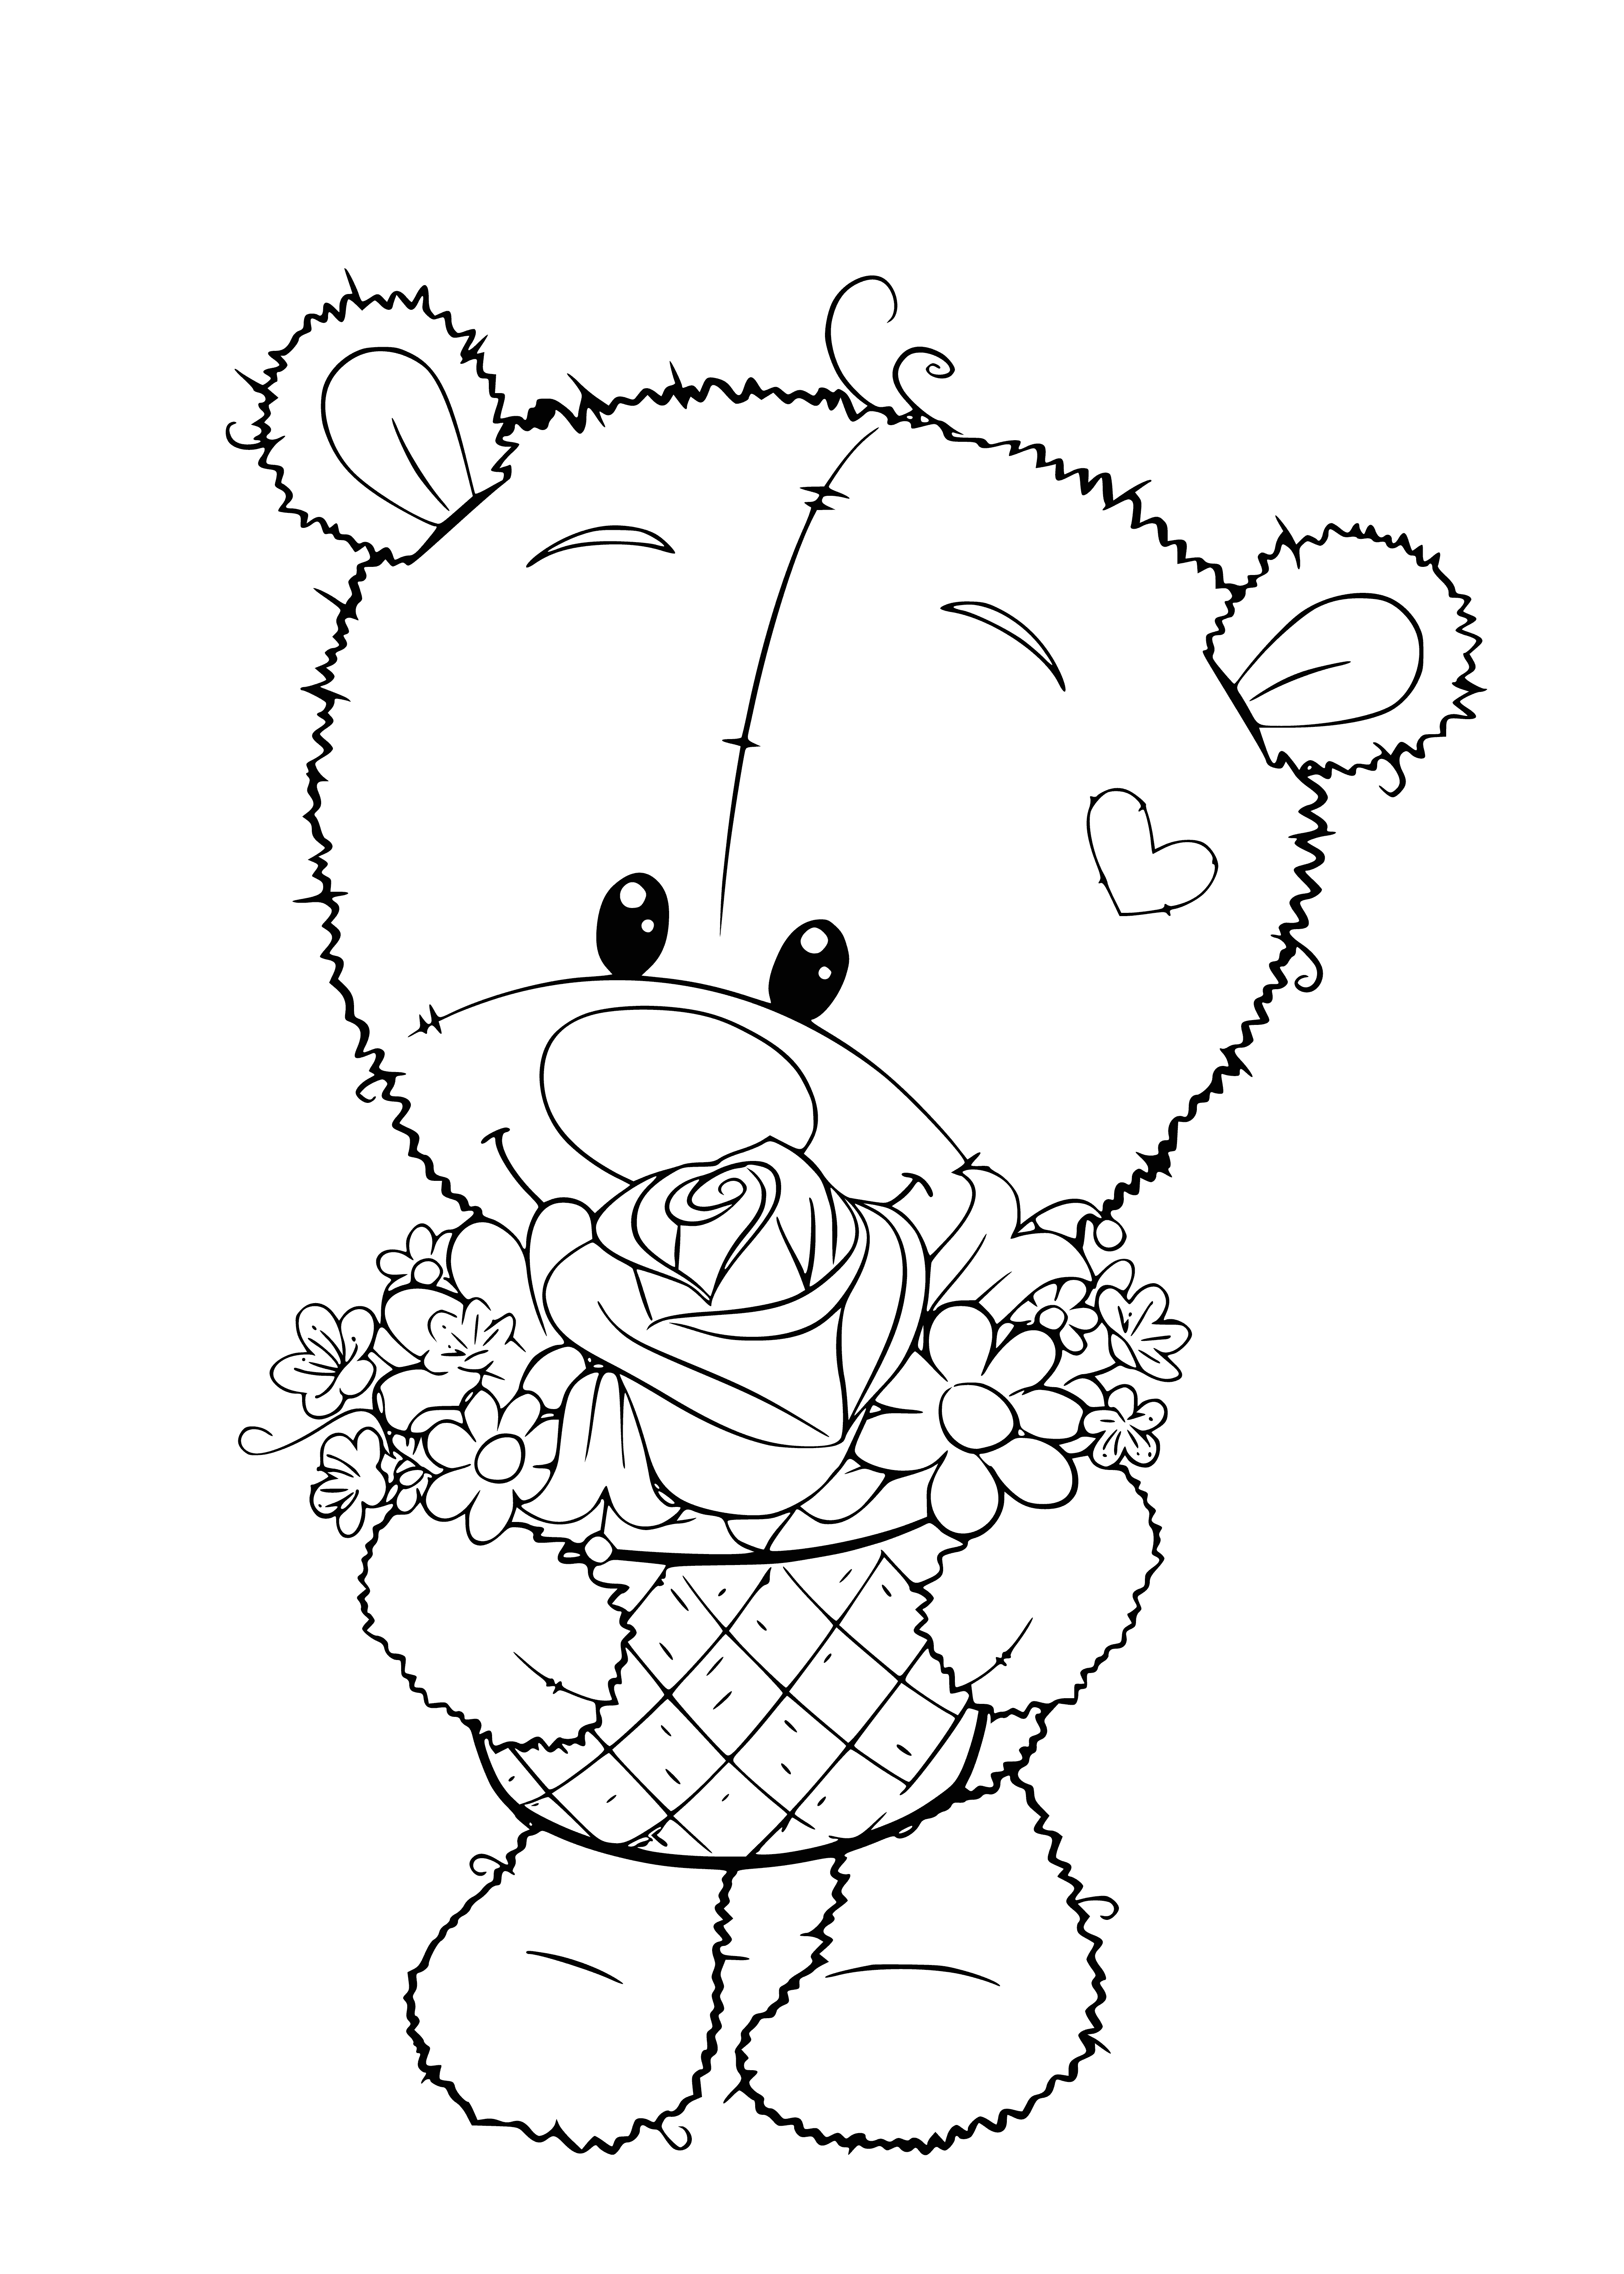 coloring page: Small, brown teddy bear holding a red flower in its paw among a cluster of colorful flowers. Black button eyes and white muzzle.